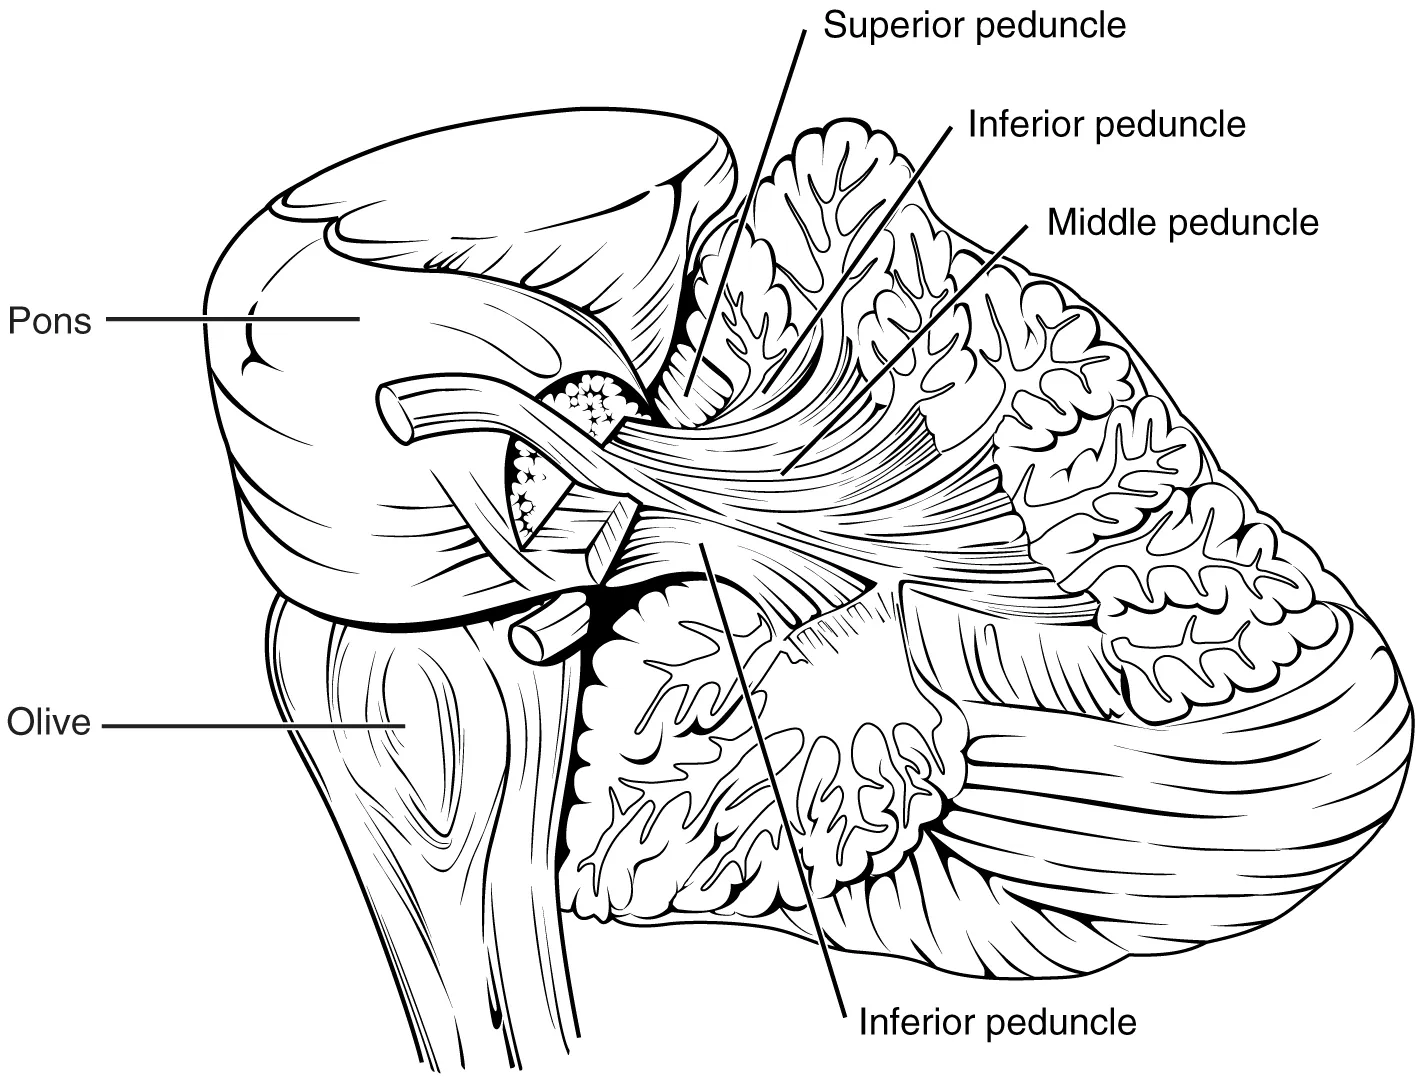 This image shows the cerebellum with the major parts including the peduncles labeled.